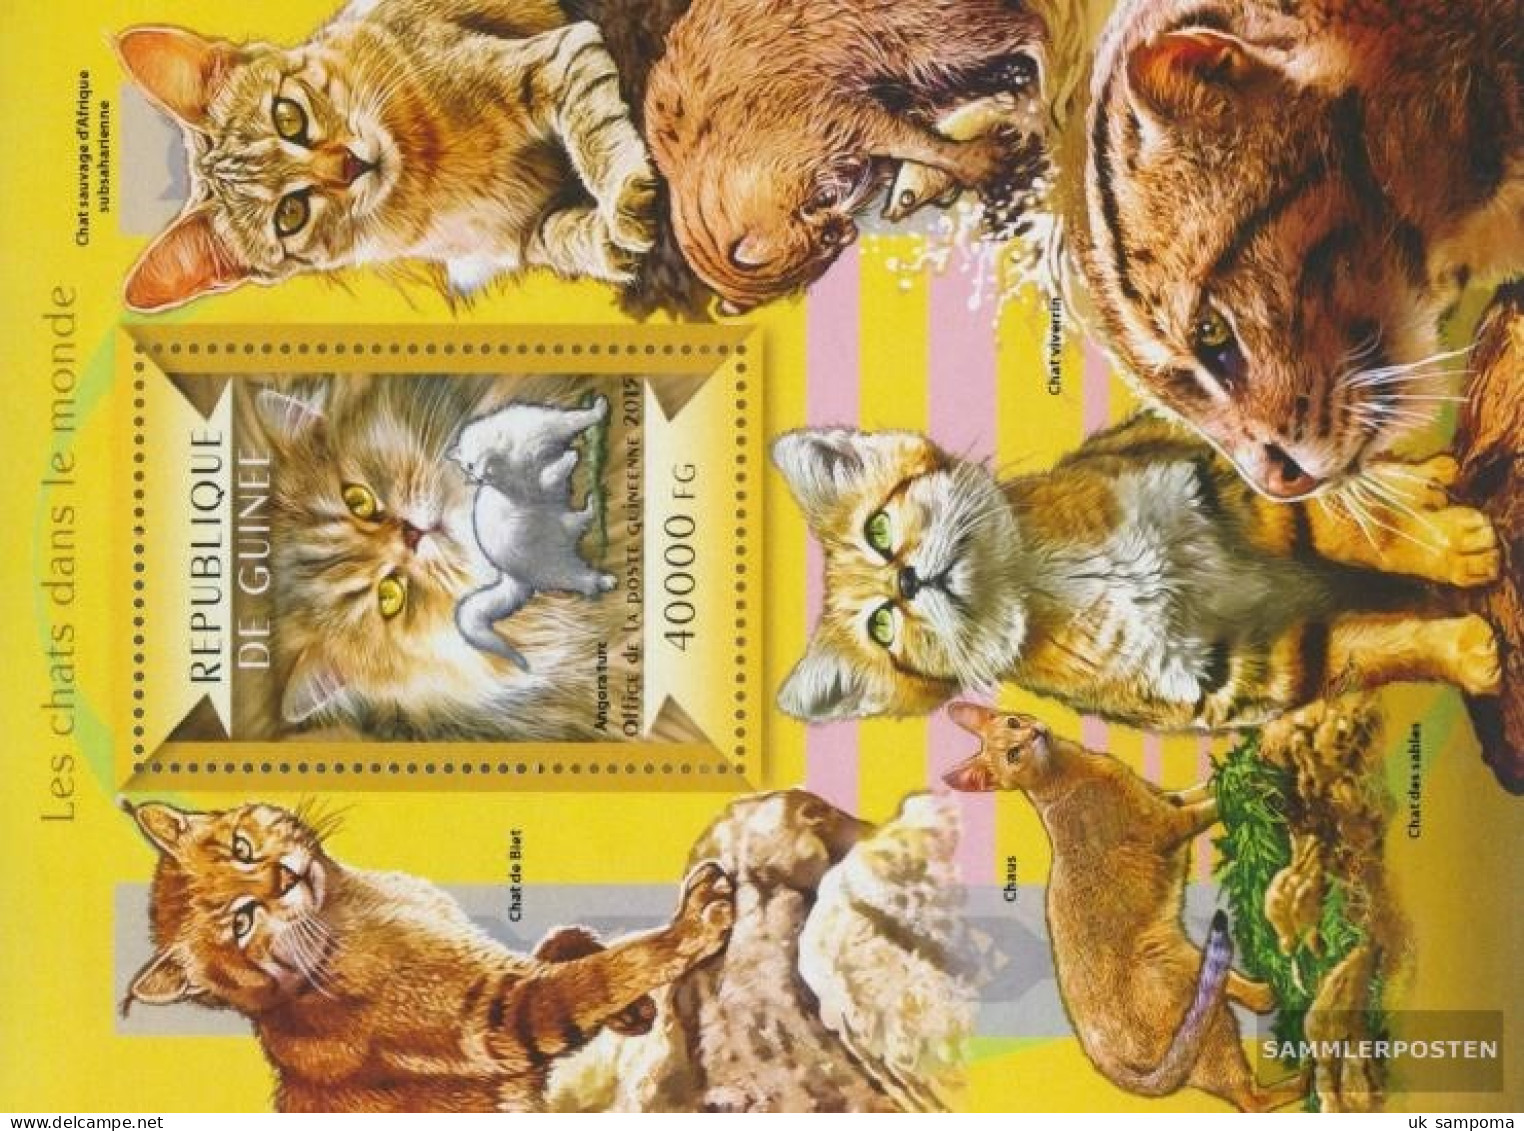 Guinea Miniature Sheet 2487 (complete. Issue) Unmounted Mint / Never Hinged 2015 Small Cats - Guinée (1958-...)